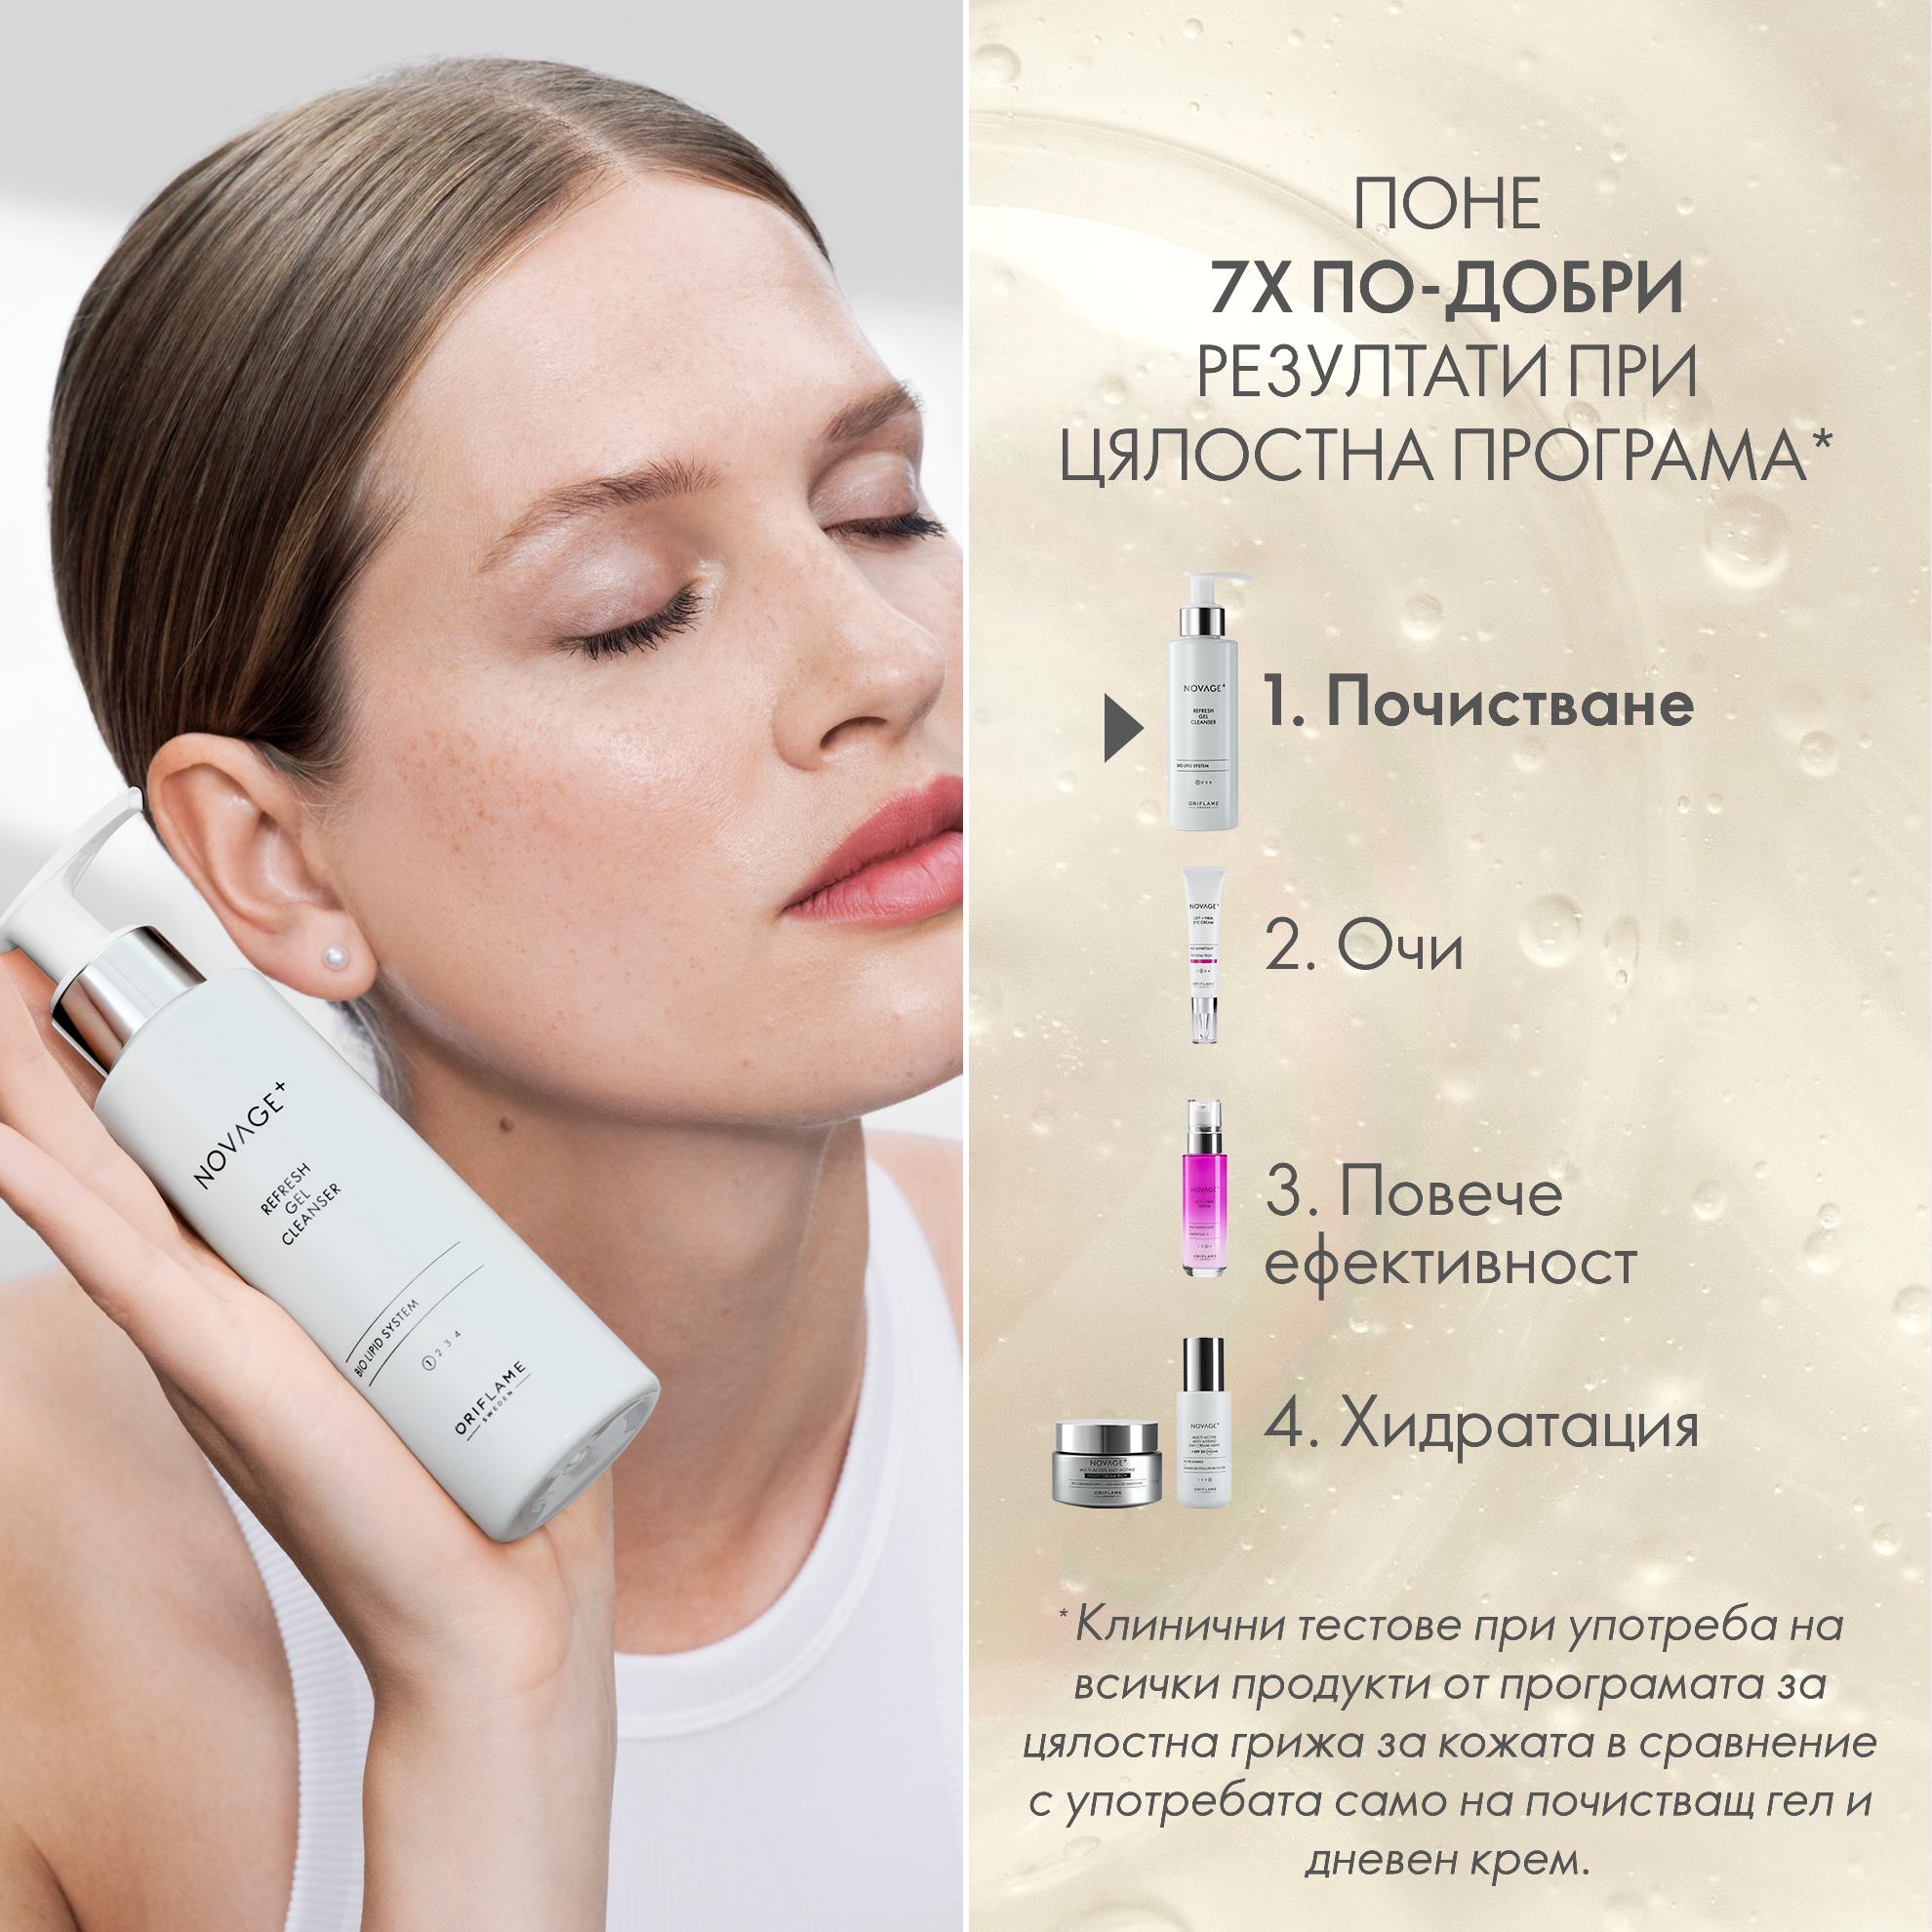 https://media-cdn.oriflame.com/productImage?externalMediaId=product-management-media%2fProducts%2f41029%2fBG%2f41029_3.png&id=17554683&version=1